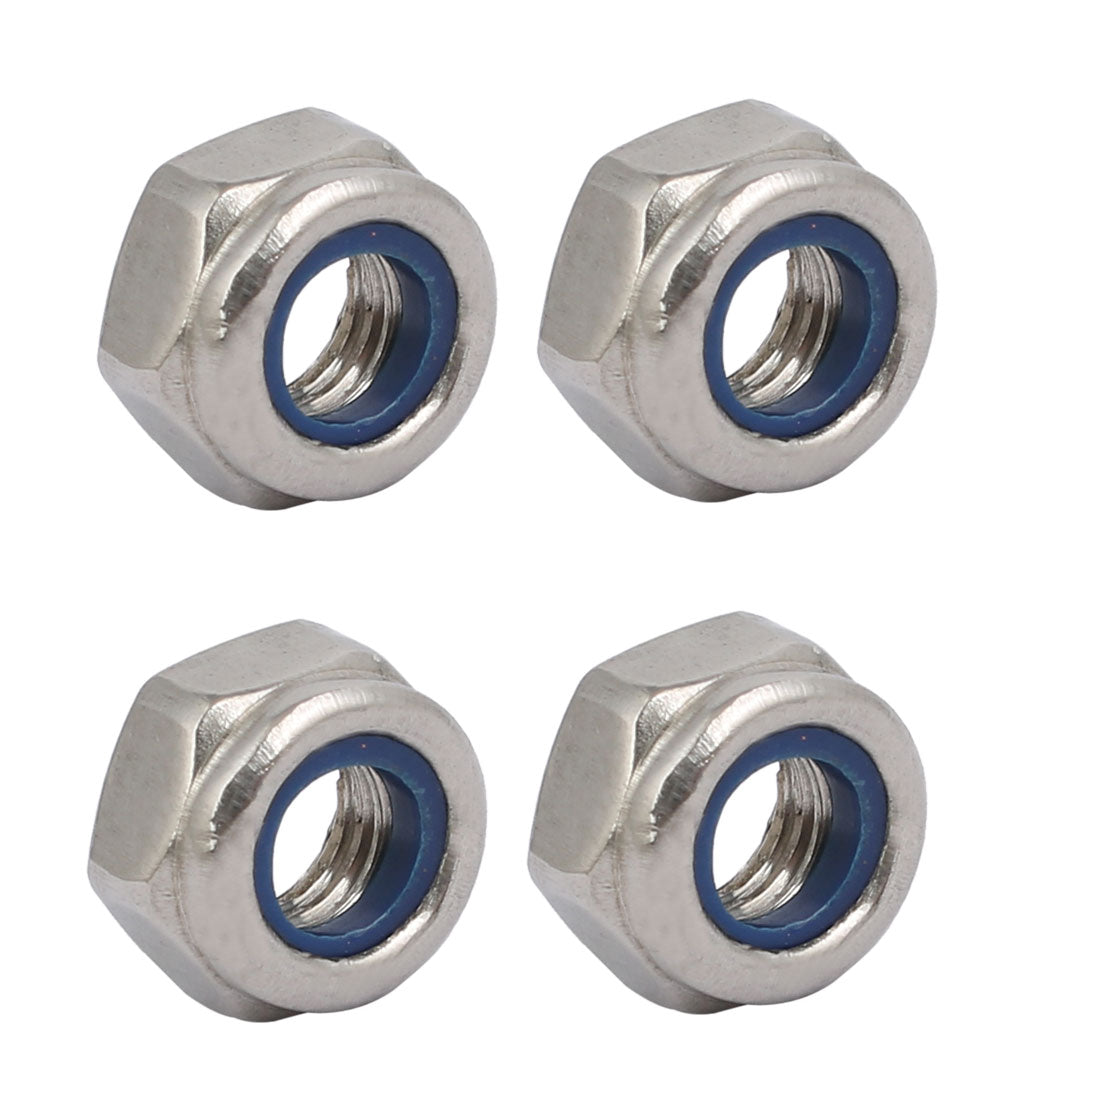 uxcell Uxcell 4pcs M6 x 1mm Pitch Metric Thread 304 Stainless Steel Left Hand Lock Nuts